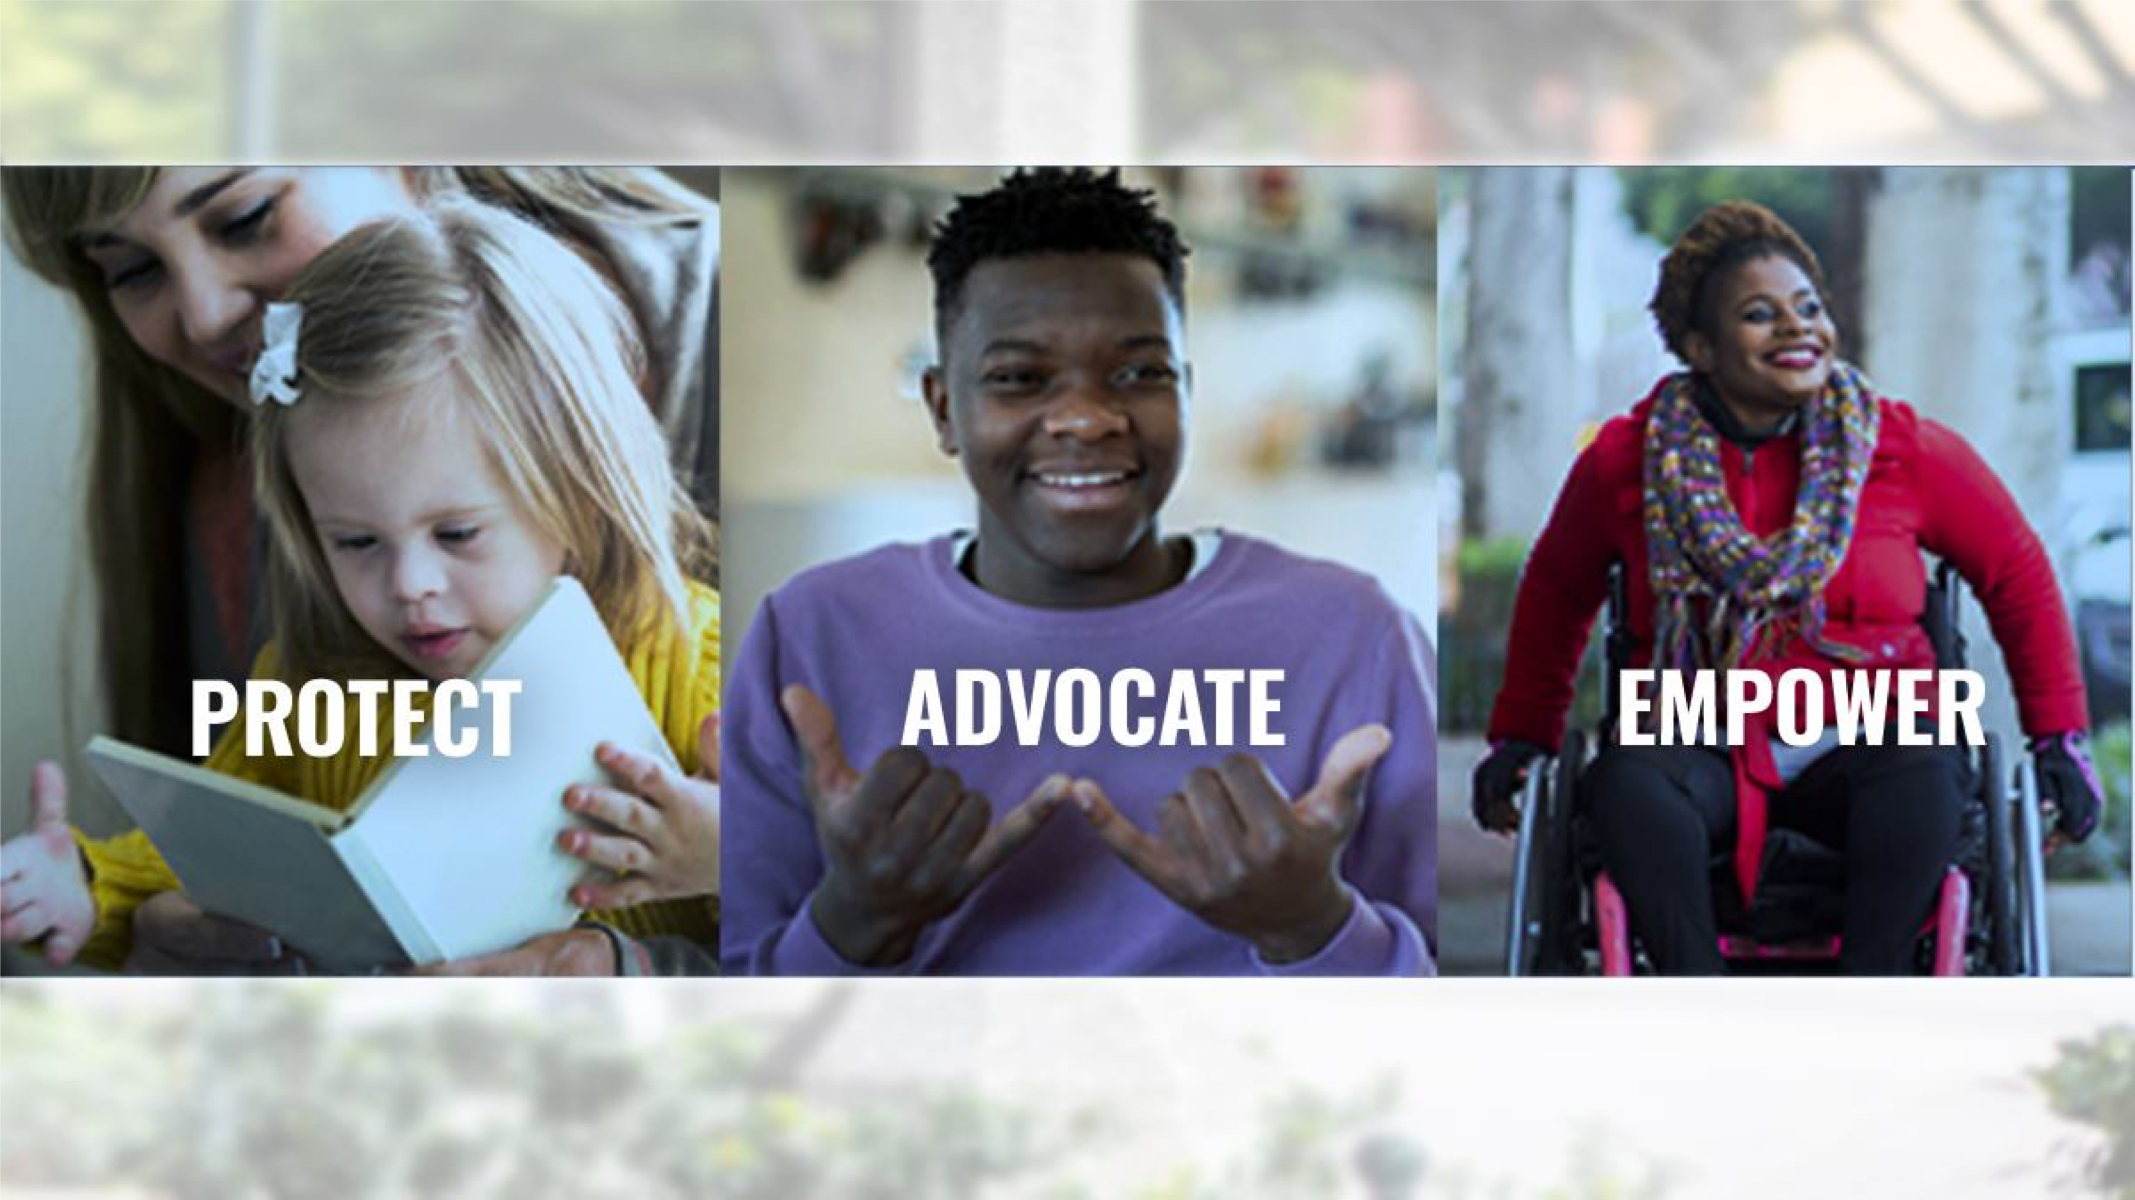 Three pictures: a young girl with developmental disabilities with her mother reading over her shoulder, a young man smiling, a smiling adult woman using a wheelchair. Text overlaid that reads "Protect, Advocate, Empower"